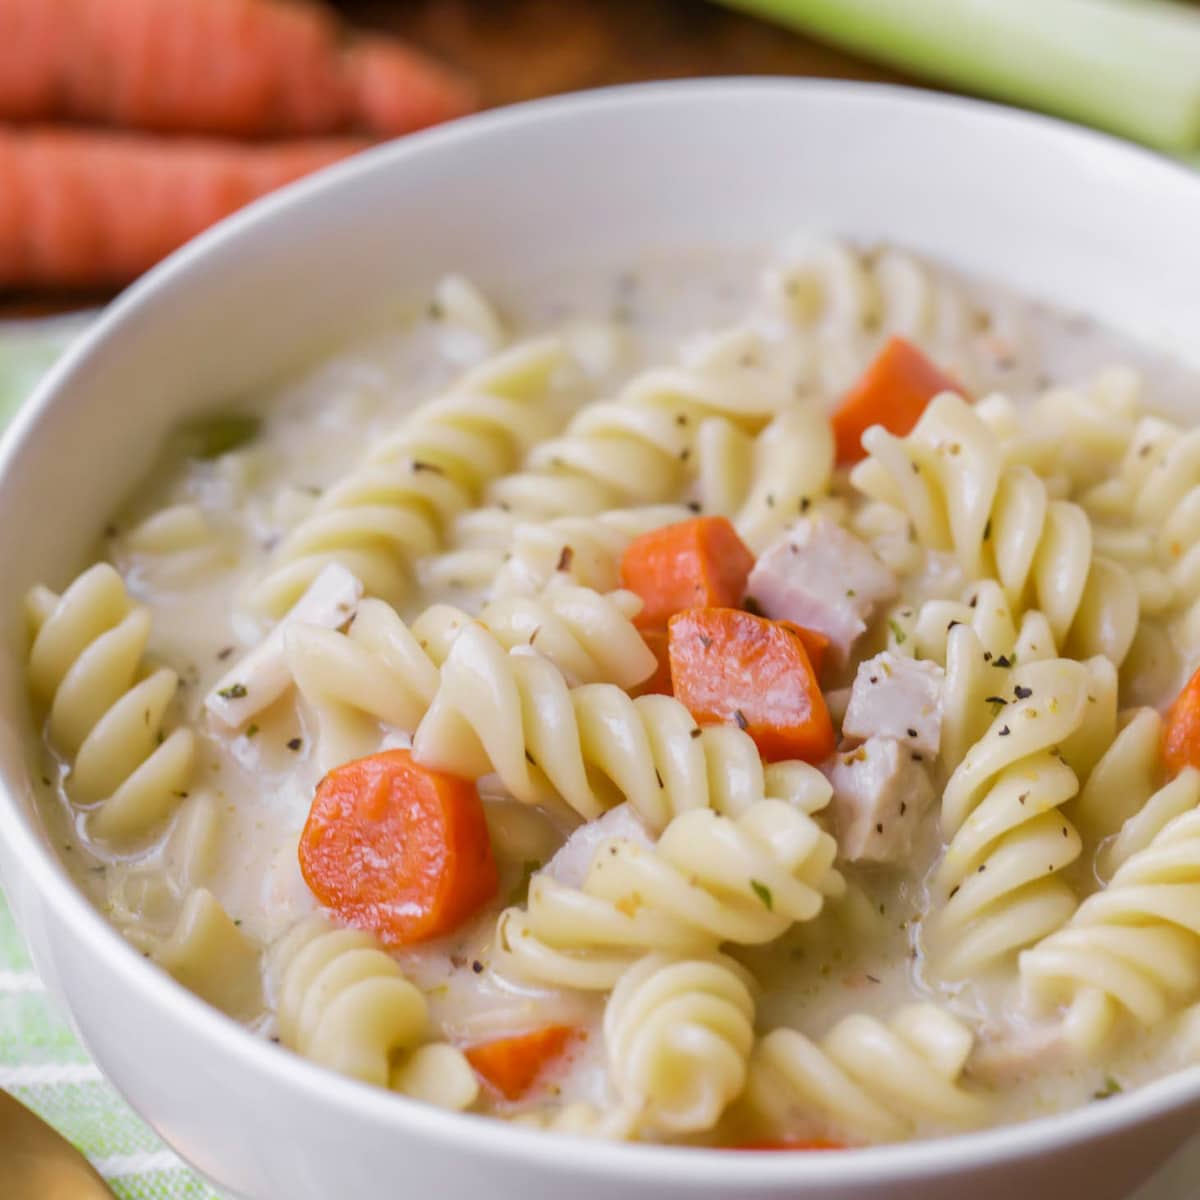 Quick dinner ideas - a bowl filled with turkey noodle soup.